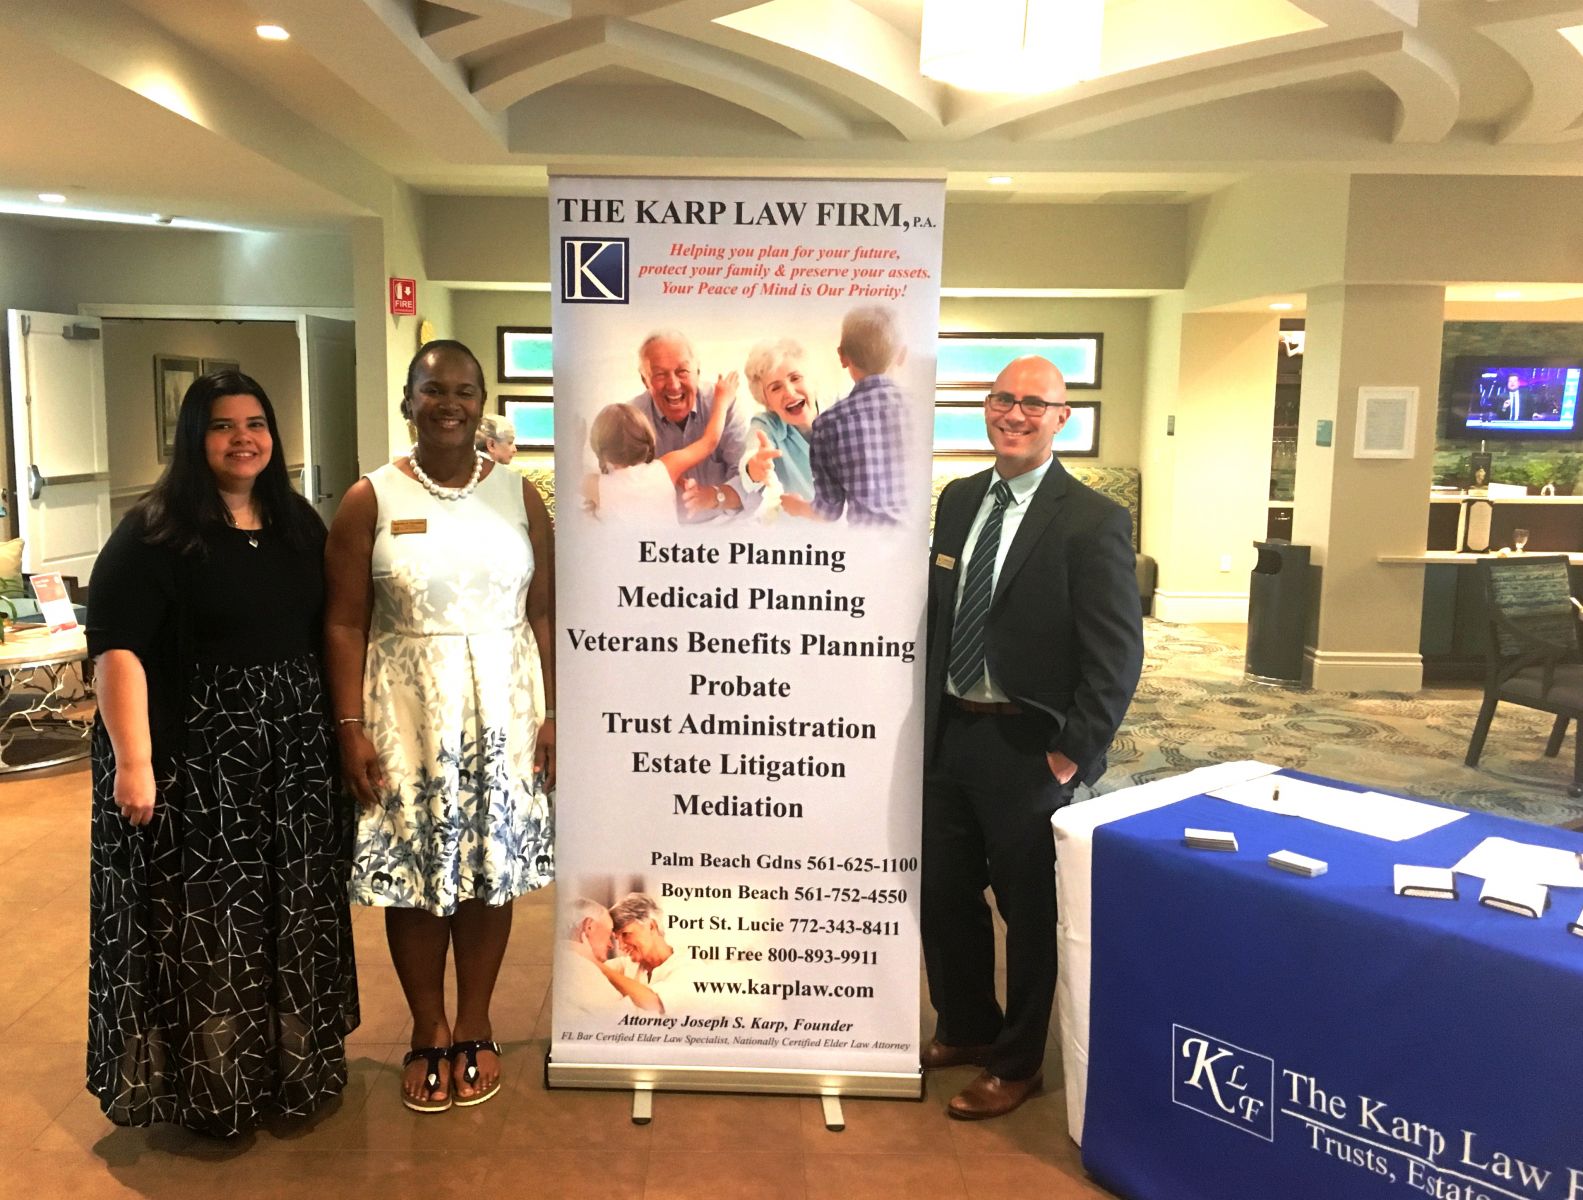 On the scene at HarborChase from The Karp Law Firm are (L-R) Quetxy Pagan, Estate Planning Assistant; Deeanna Farrington, MSW, Case Manager Supervisor; and Attorney Jonathan Karp 